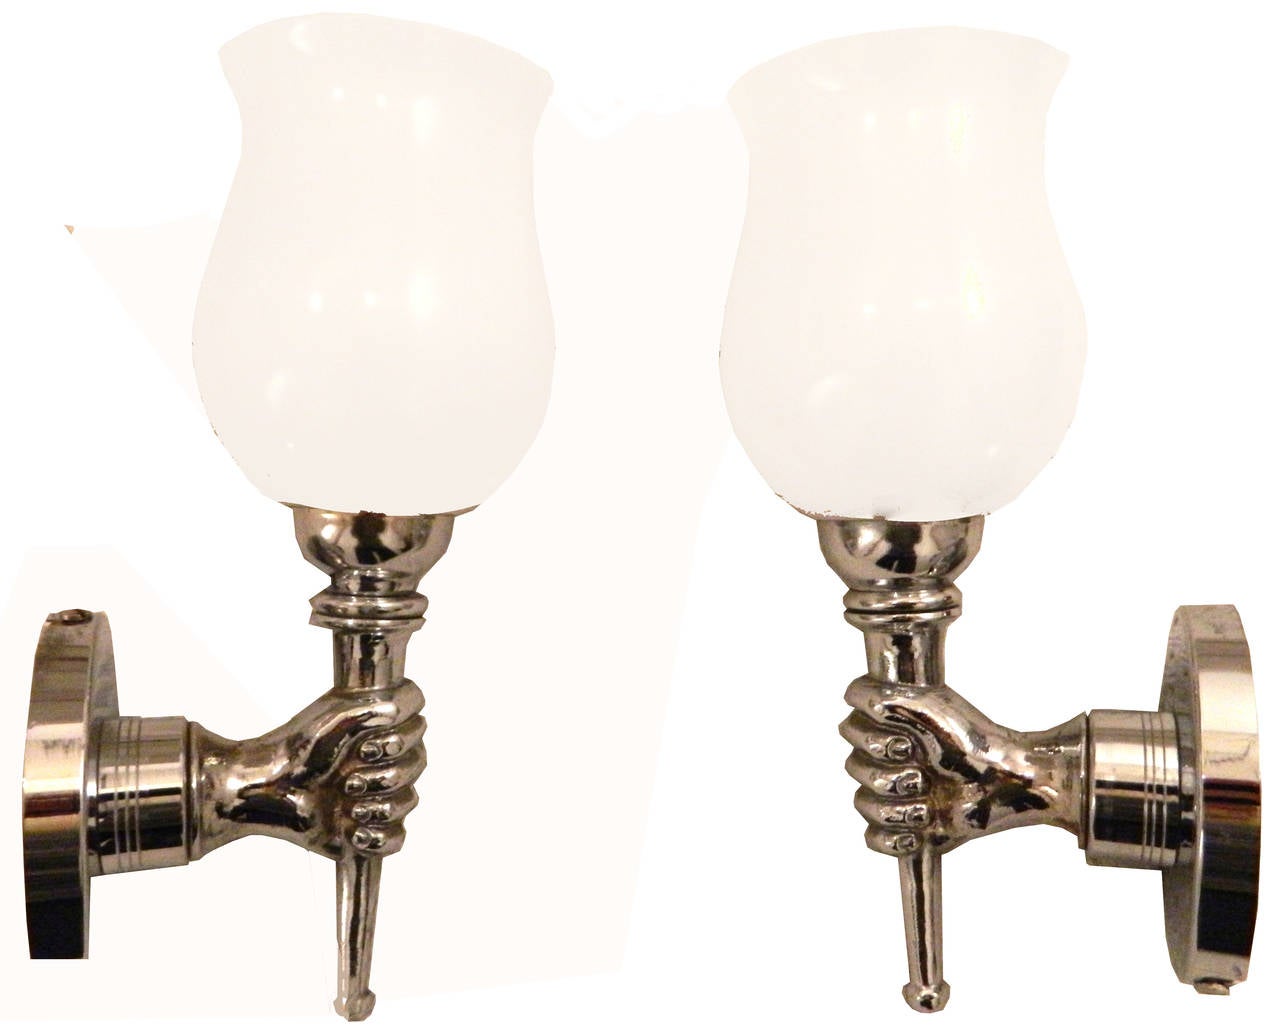 Very nice pair circa 1950s of nickel plated  sconces by Arbus. Original white opaline shades.
2 pair available, Price for one pair.
Back plates : 3.5